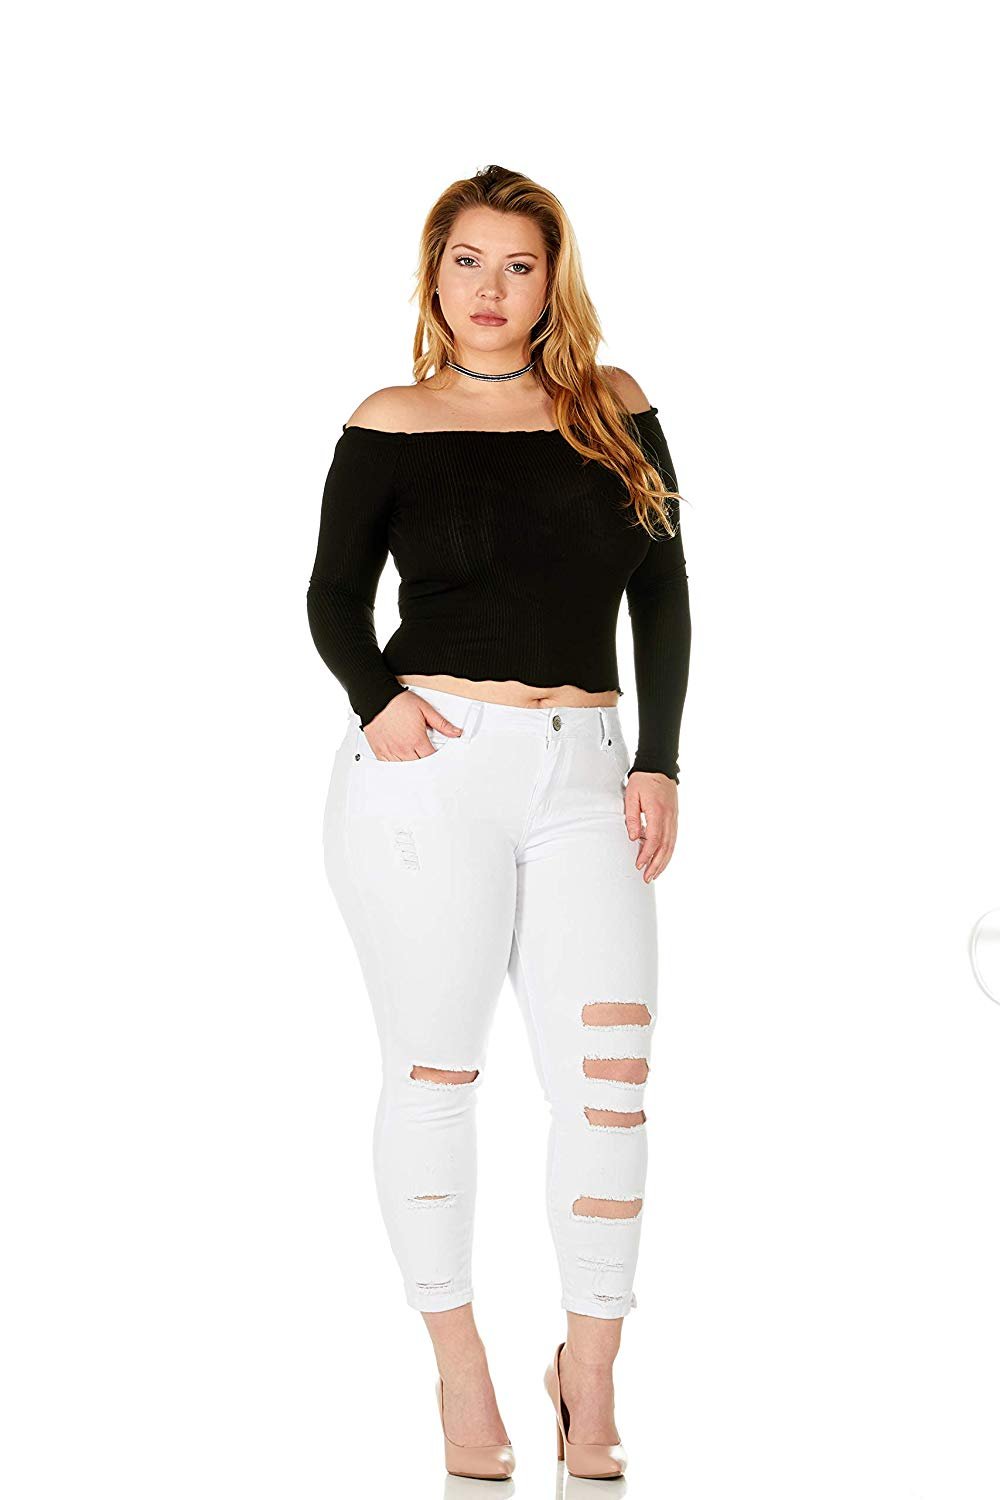 CG JEANS Plus Size Cute Juniors Big Mid Rise Large Ripped Torn Crop Skinny Fit, White Denim 22 - image 4 of 7